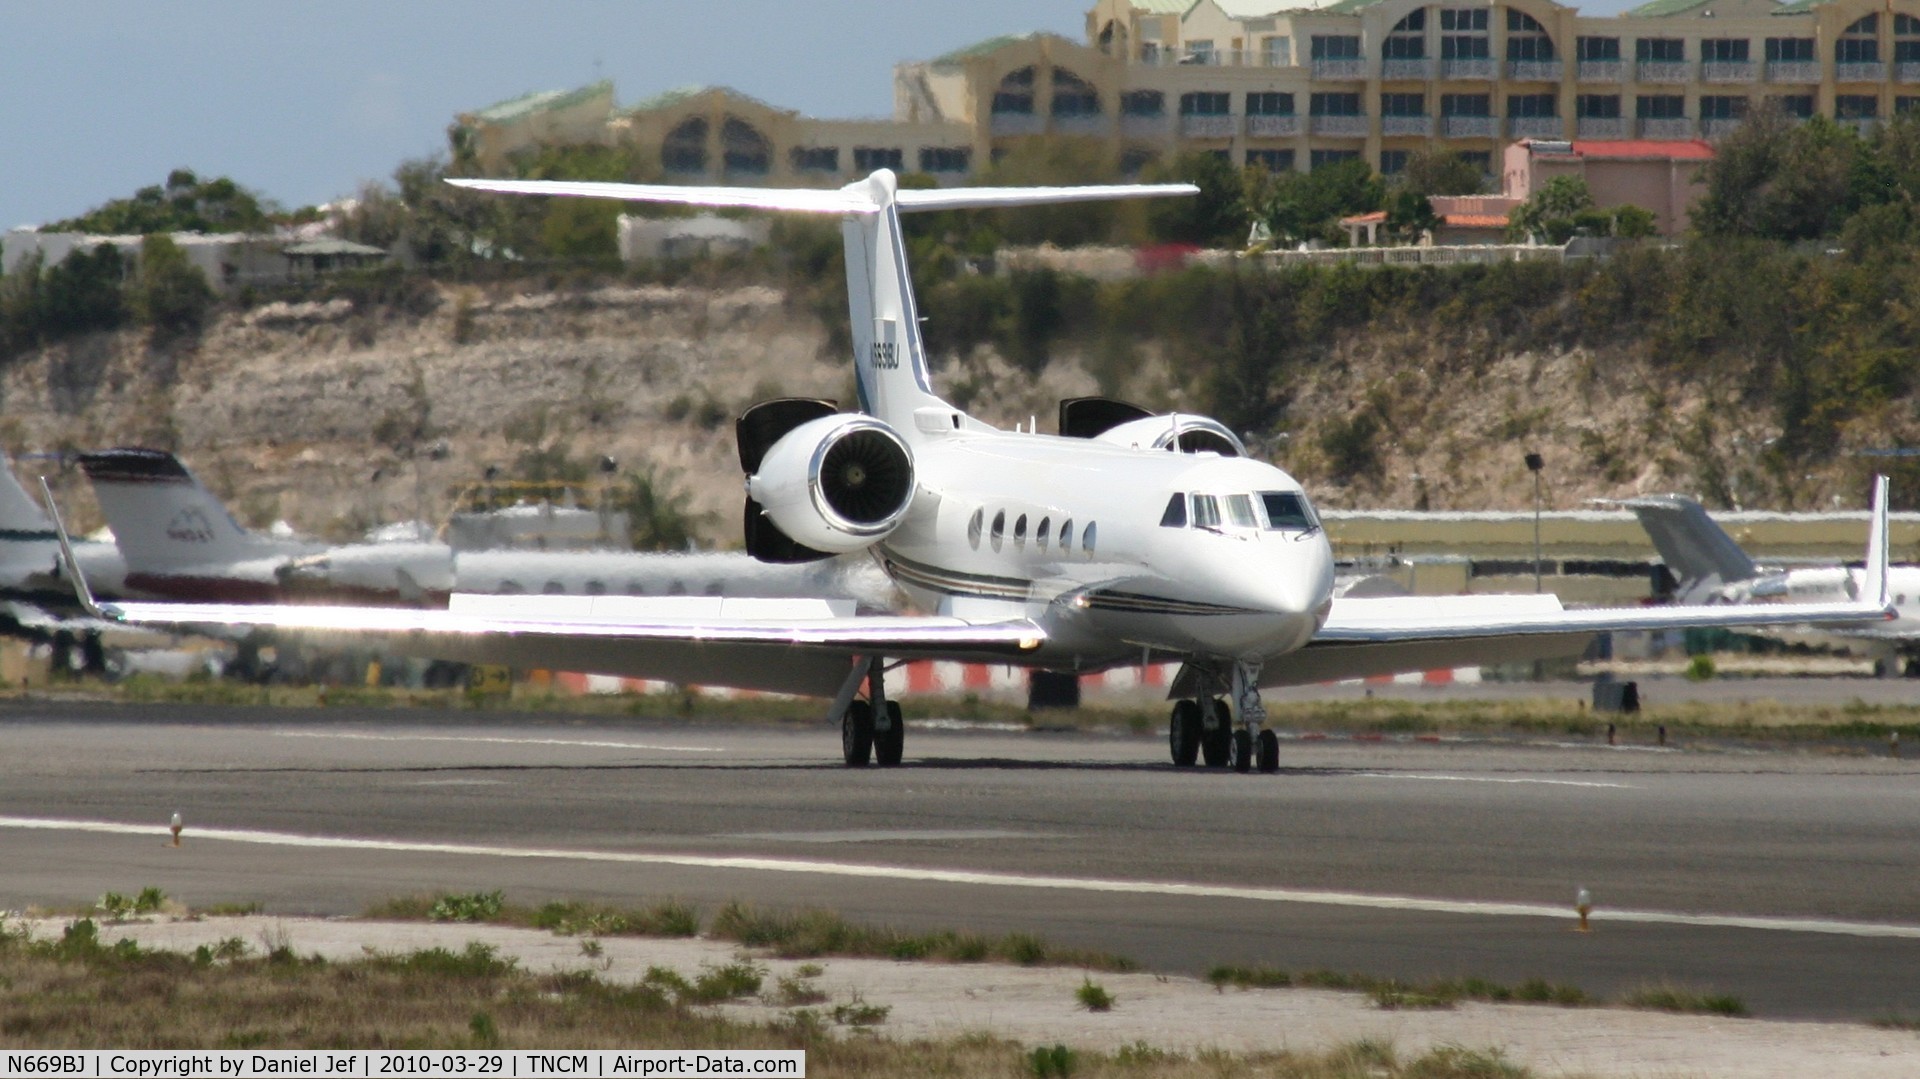 N669BJ, 2000 Gulfstream Aerospace G-IV C/N 1397, N669BJ just landed at TNCM and making use of there stopping powers